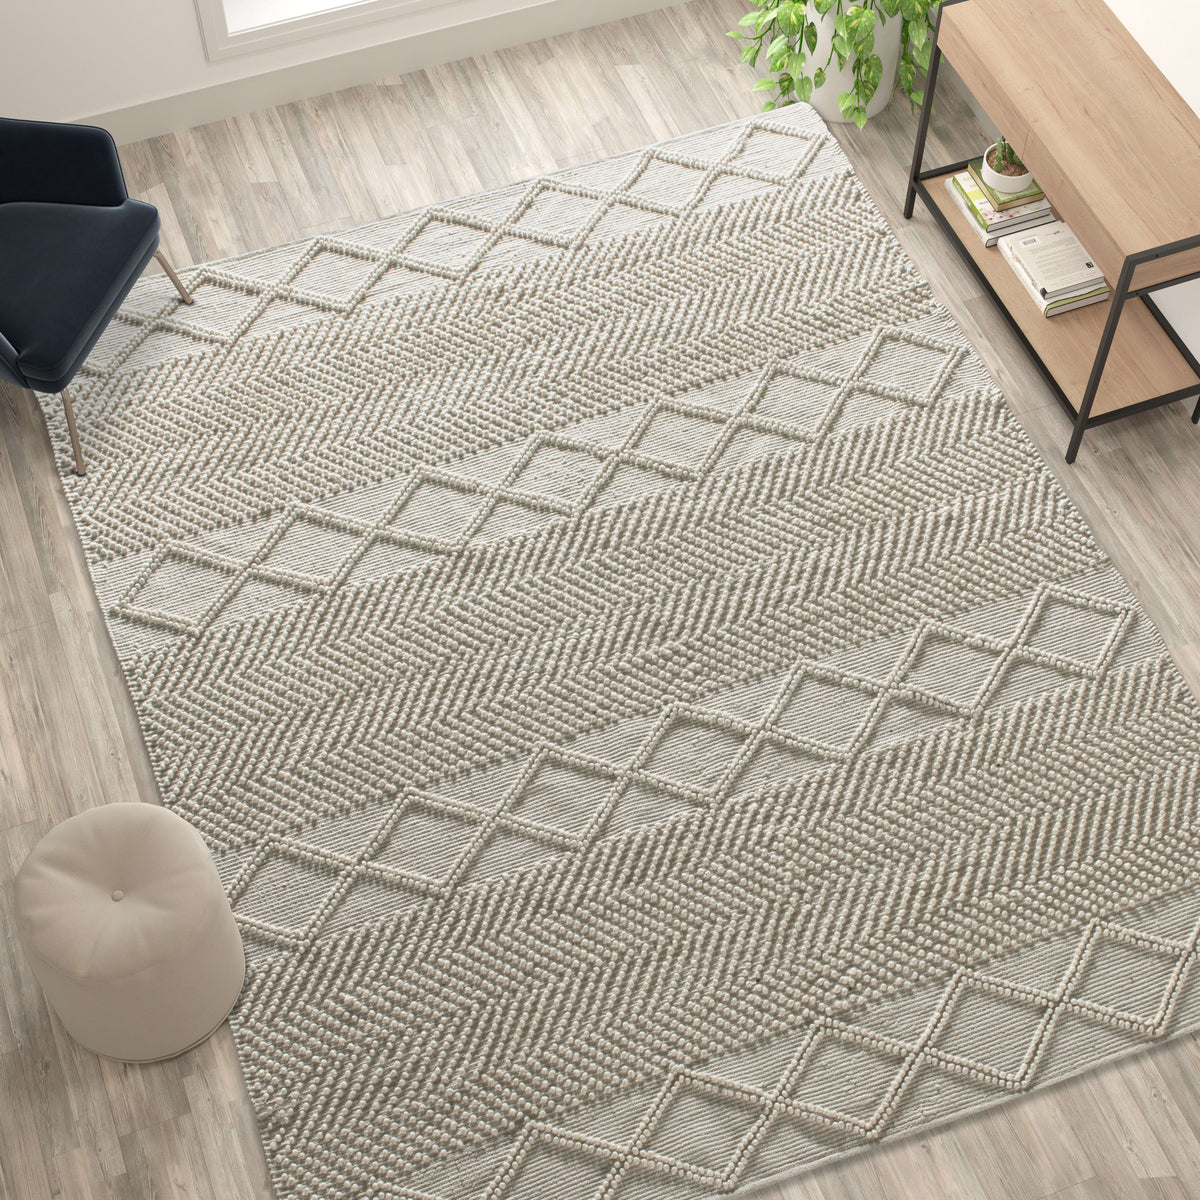 White/Ivory,8' x 10' |#| 8' x 10' Triple Blend White and Ivory Handwoven Geometric Area Rug